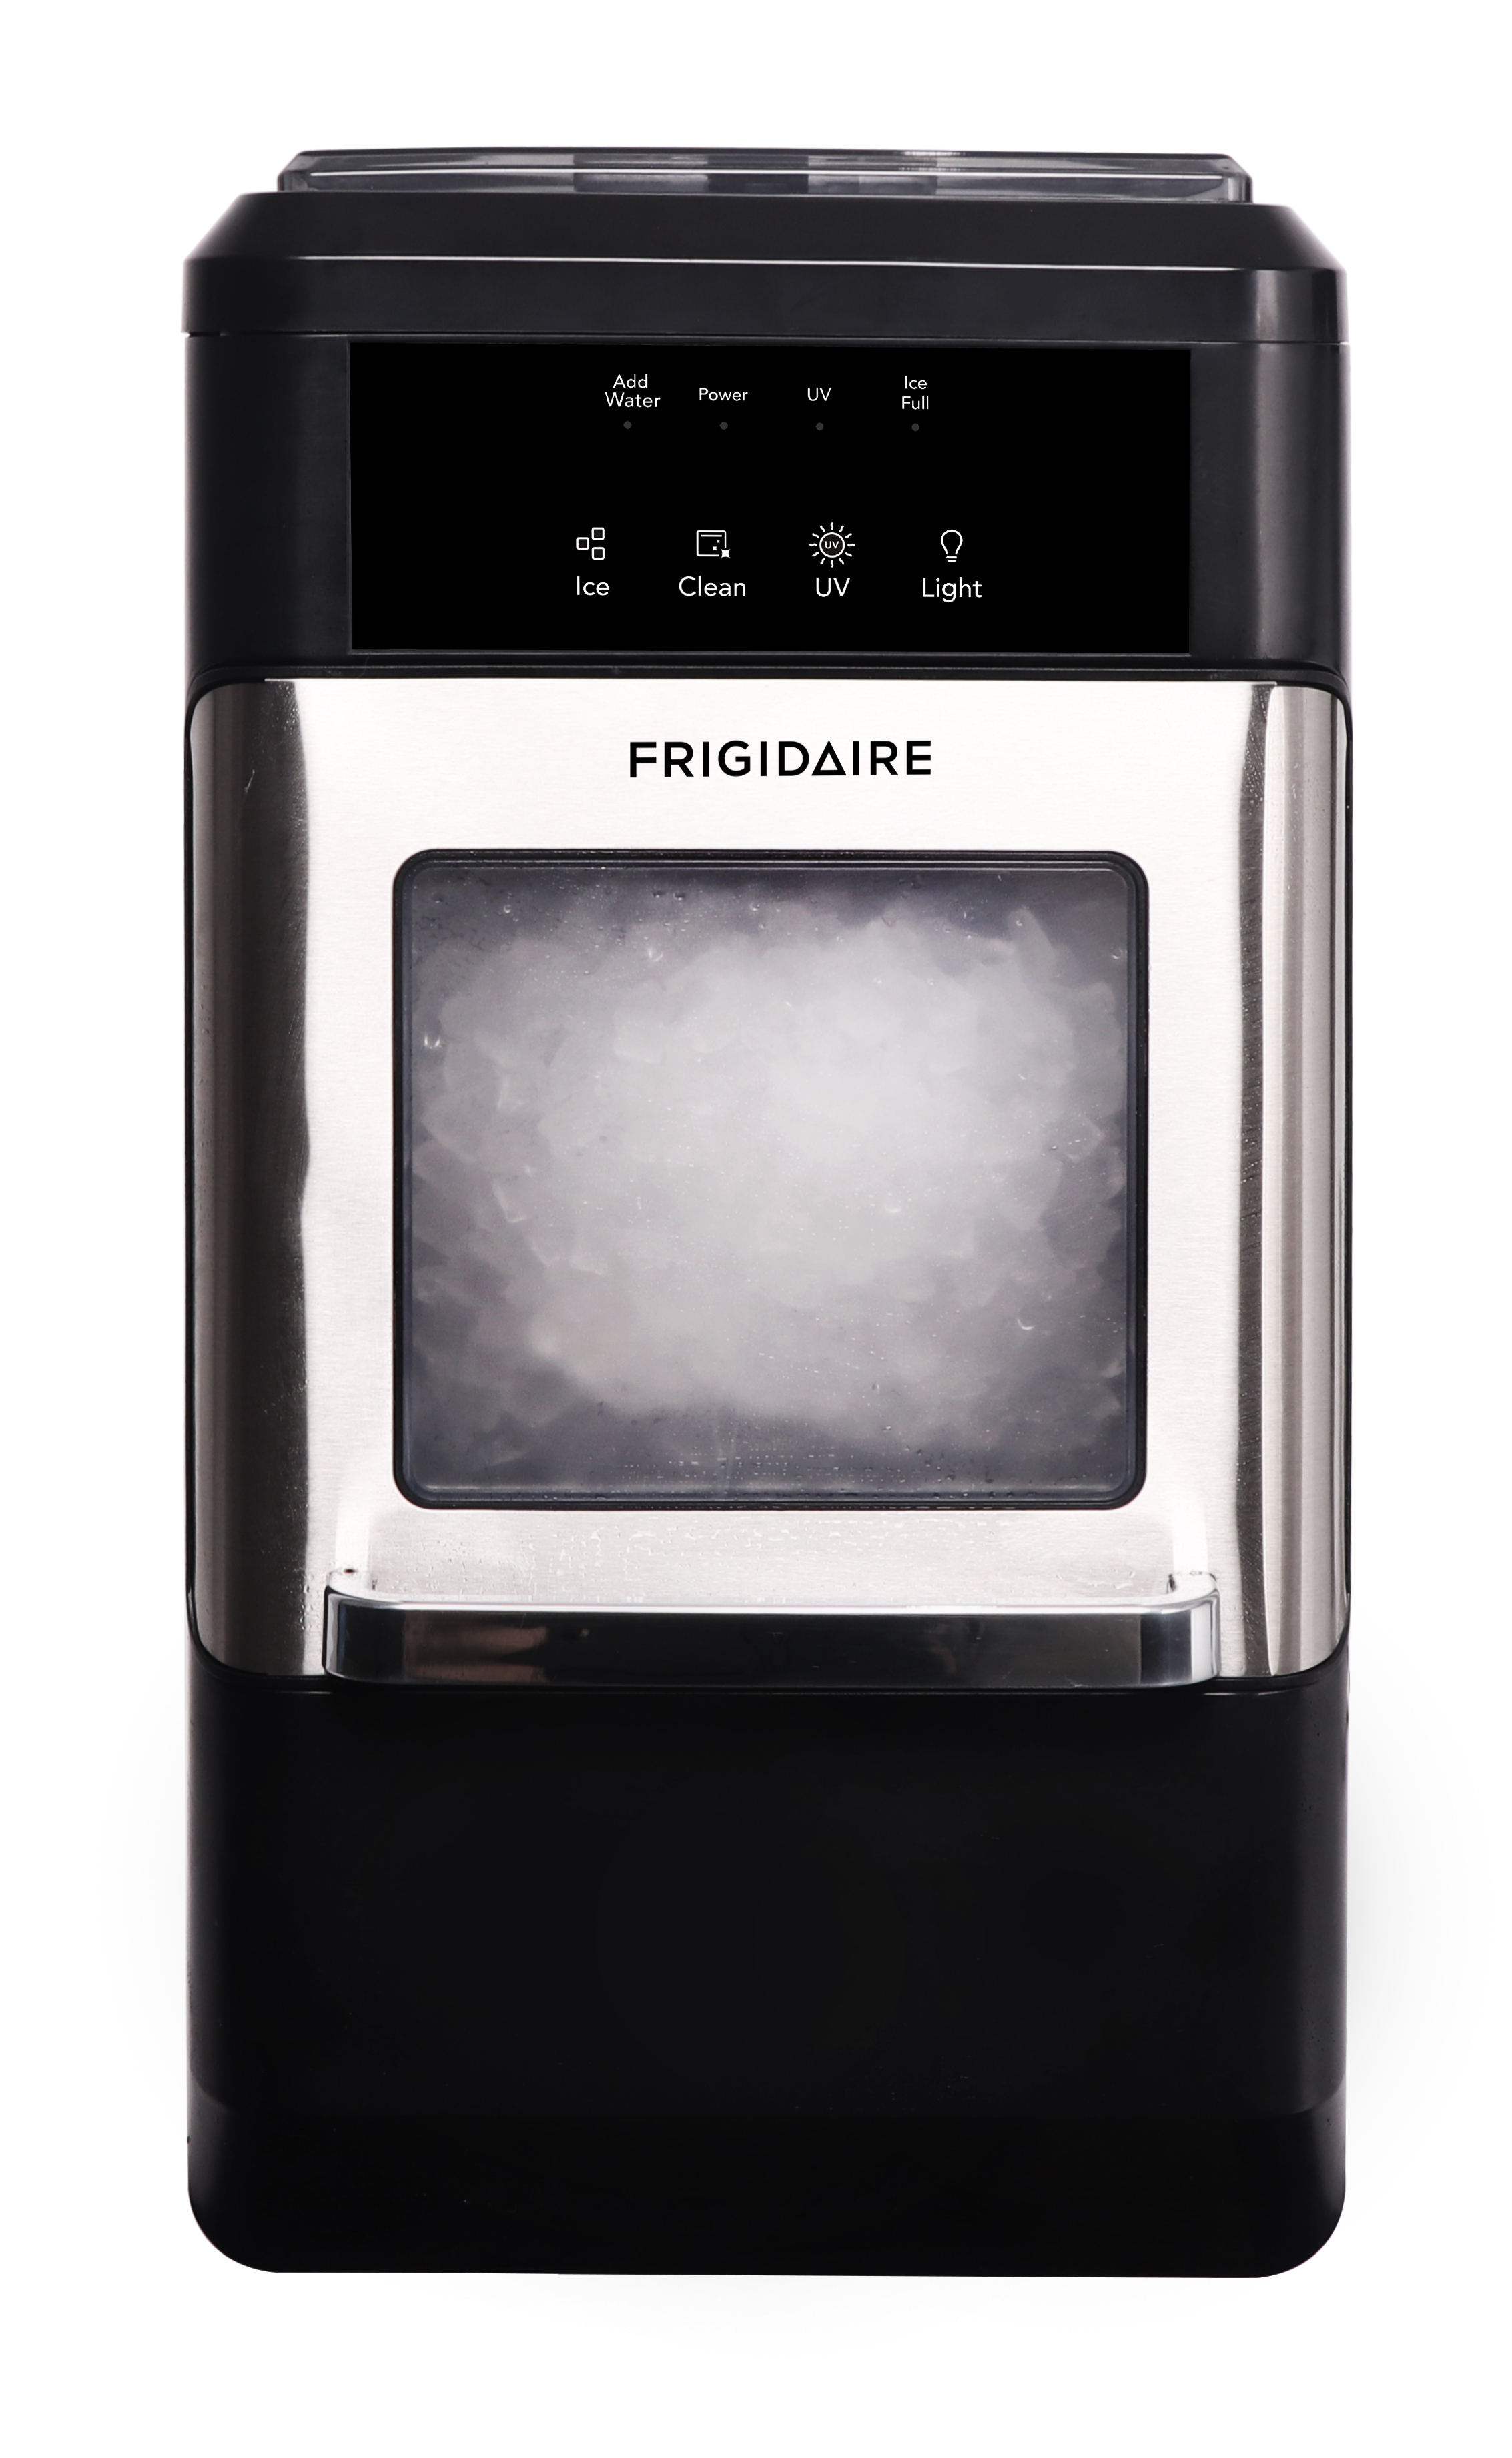 Frigidaire 44 lbs. Crunchy Chewable Nugget Ice Maker EFIC235, Stainless Steel - image 1 of 22